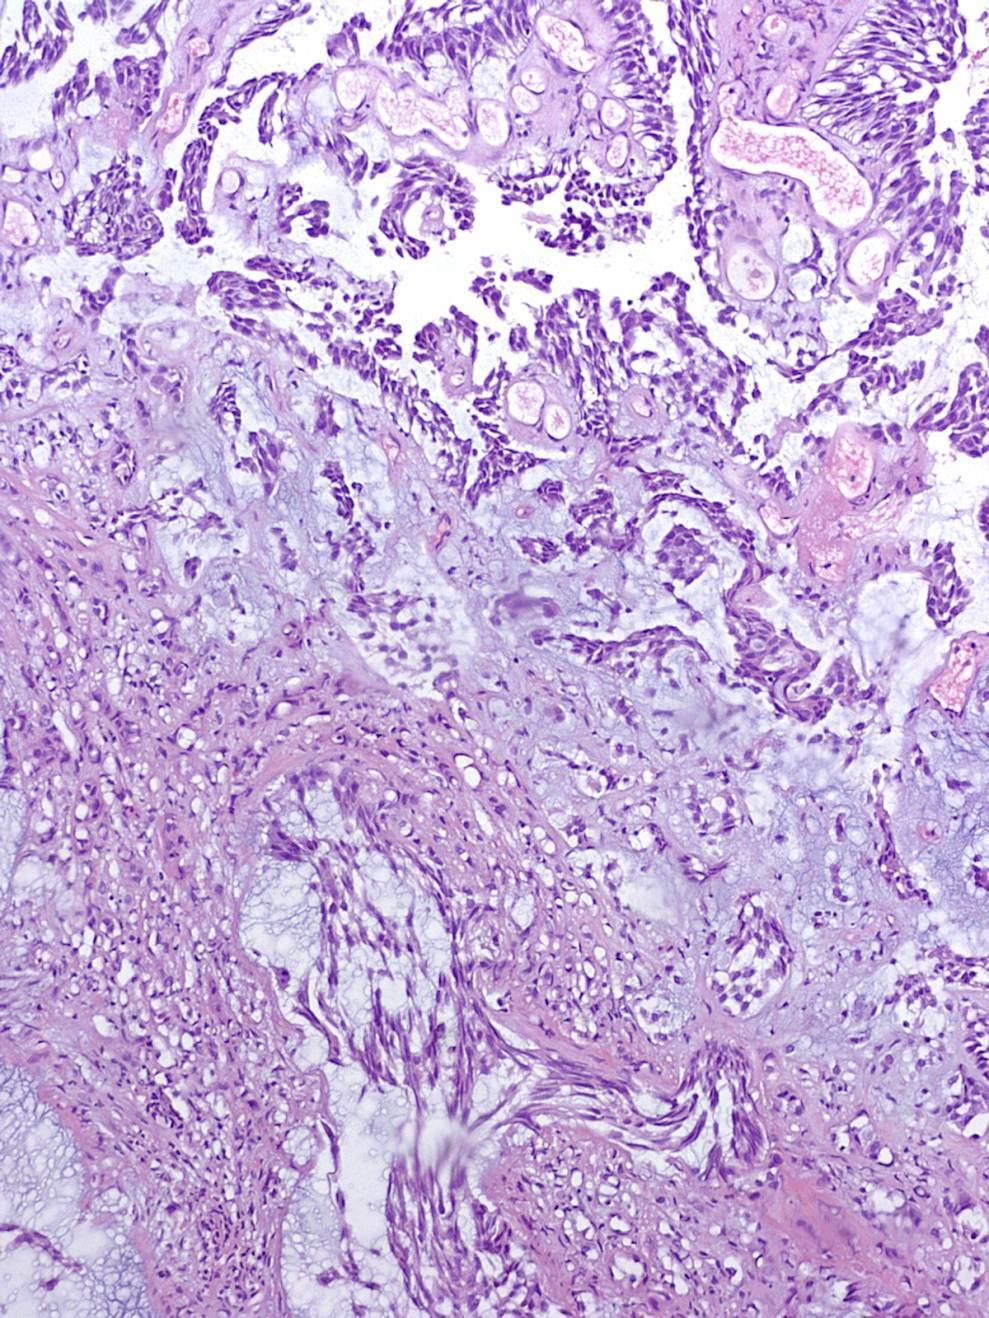 UC with chordoid features UC with unique chordoid morphology; - Cellular cording - Myxoid stromal matrix Reminiscent of chordoma, extraskeletal myxoid